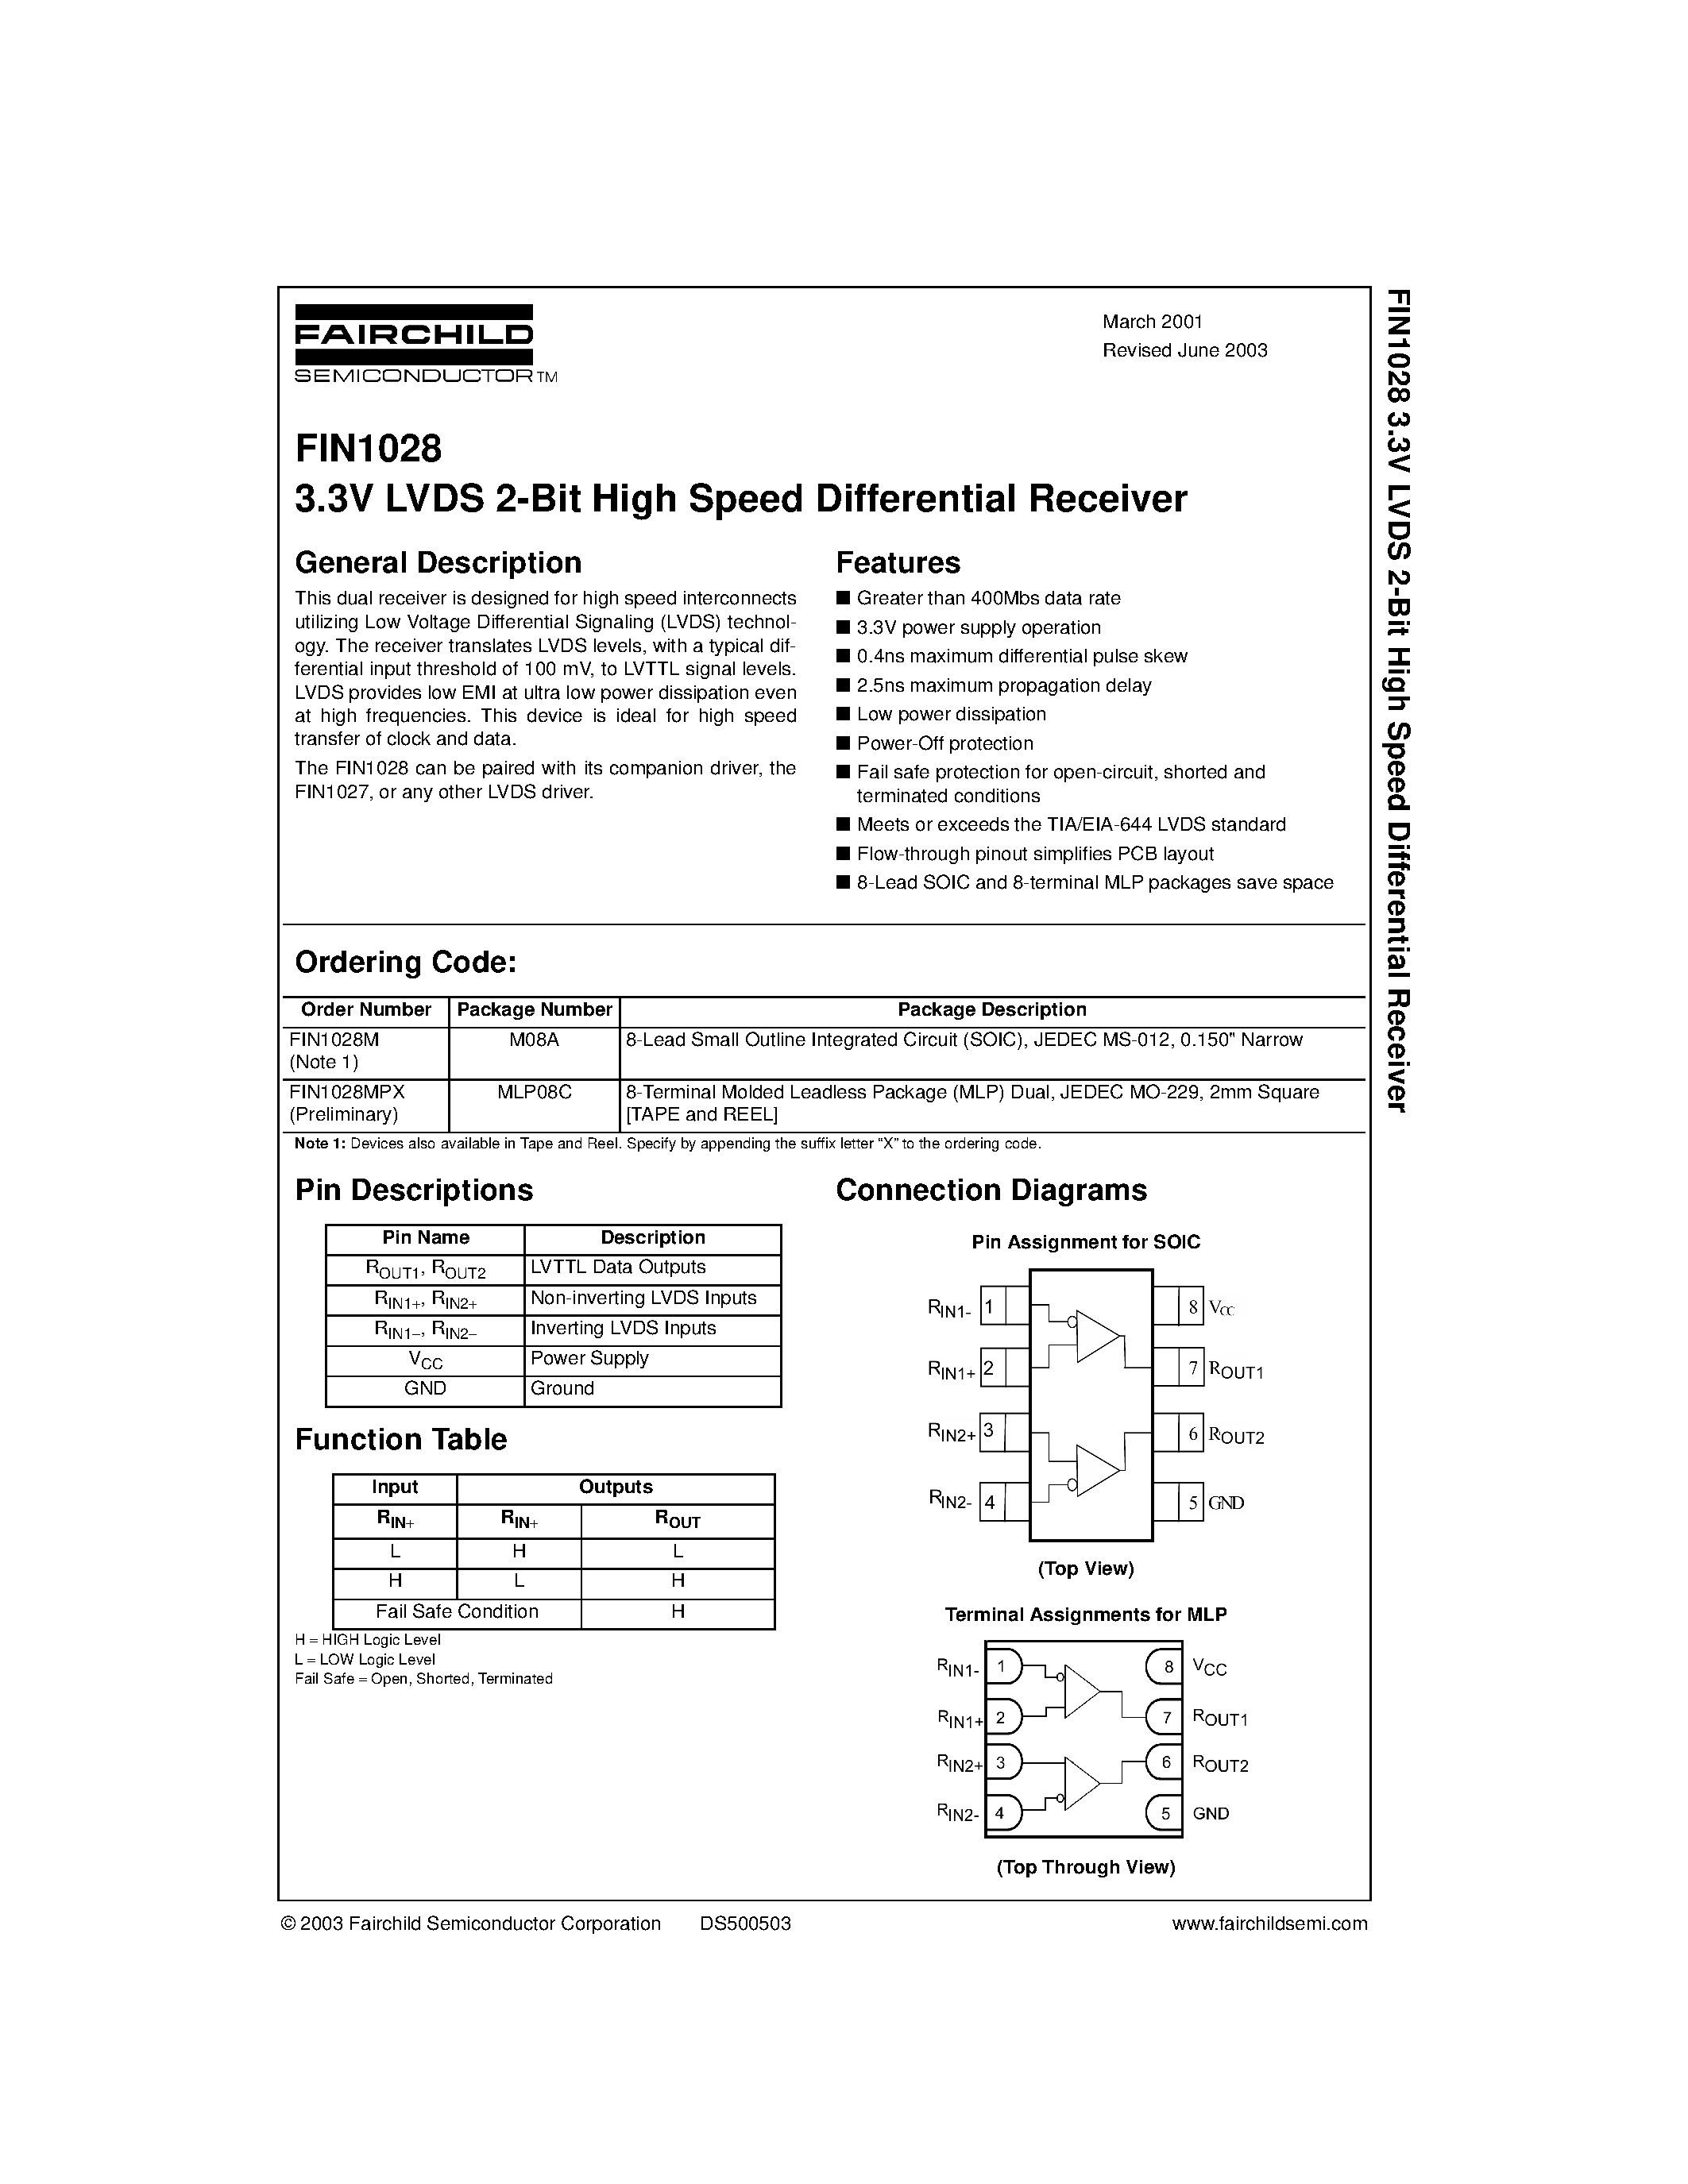 Datasheet FIN1028M - 3.3V LVDS 2-Bit High Speed Differential Receiver page 1